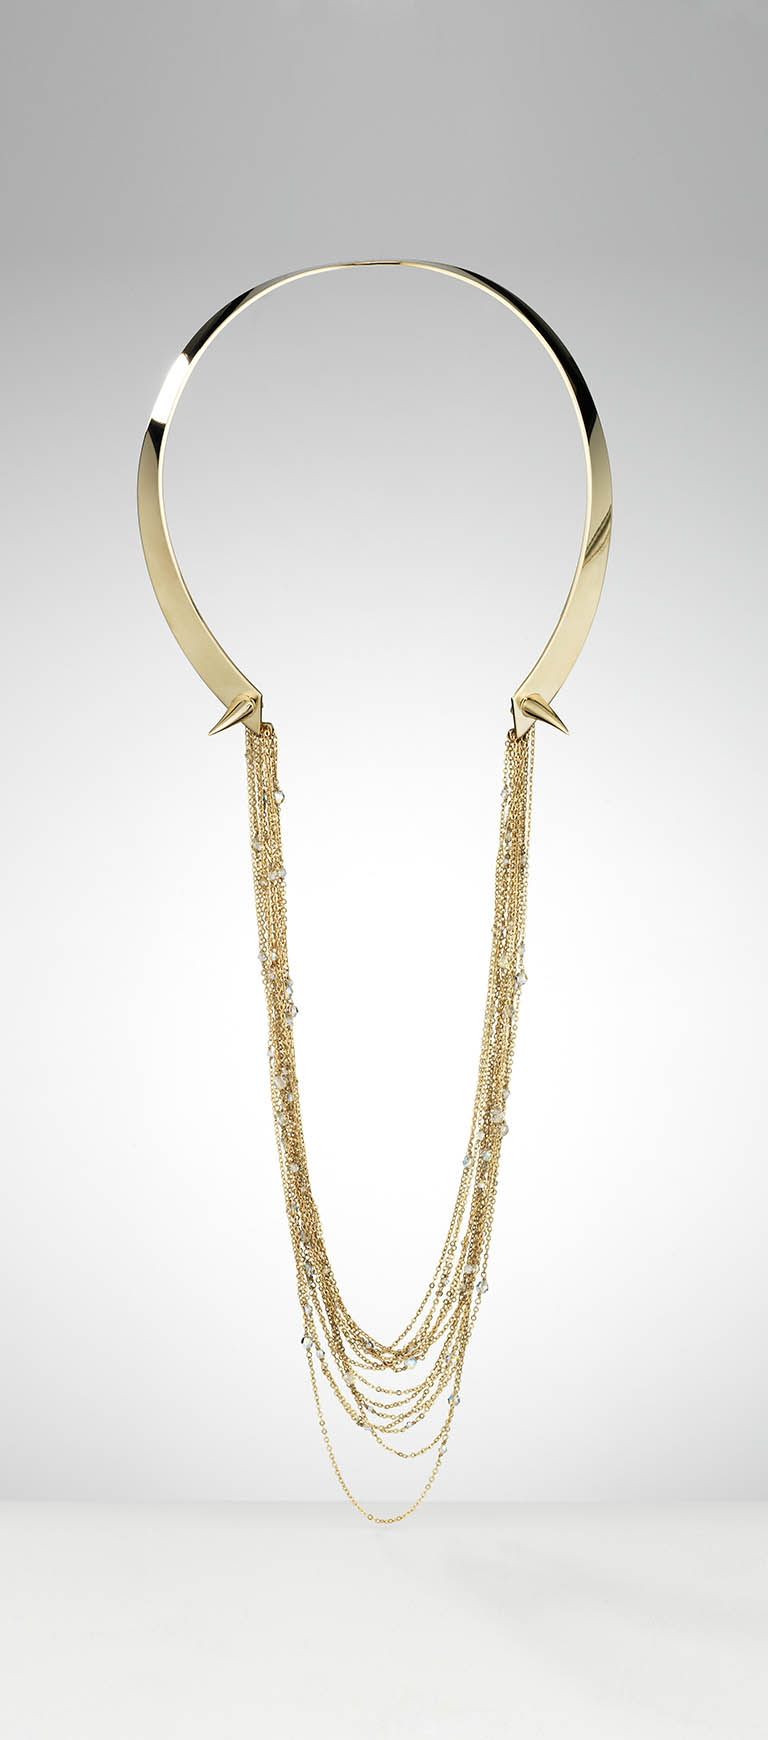 Packshot Factory - Fine jewellery - Eden Diodati gold necklace with chain